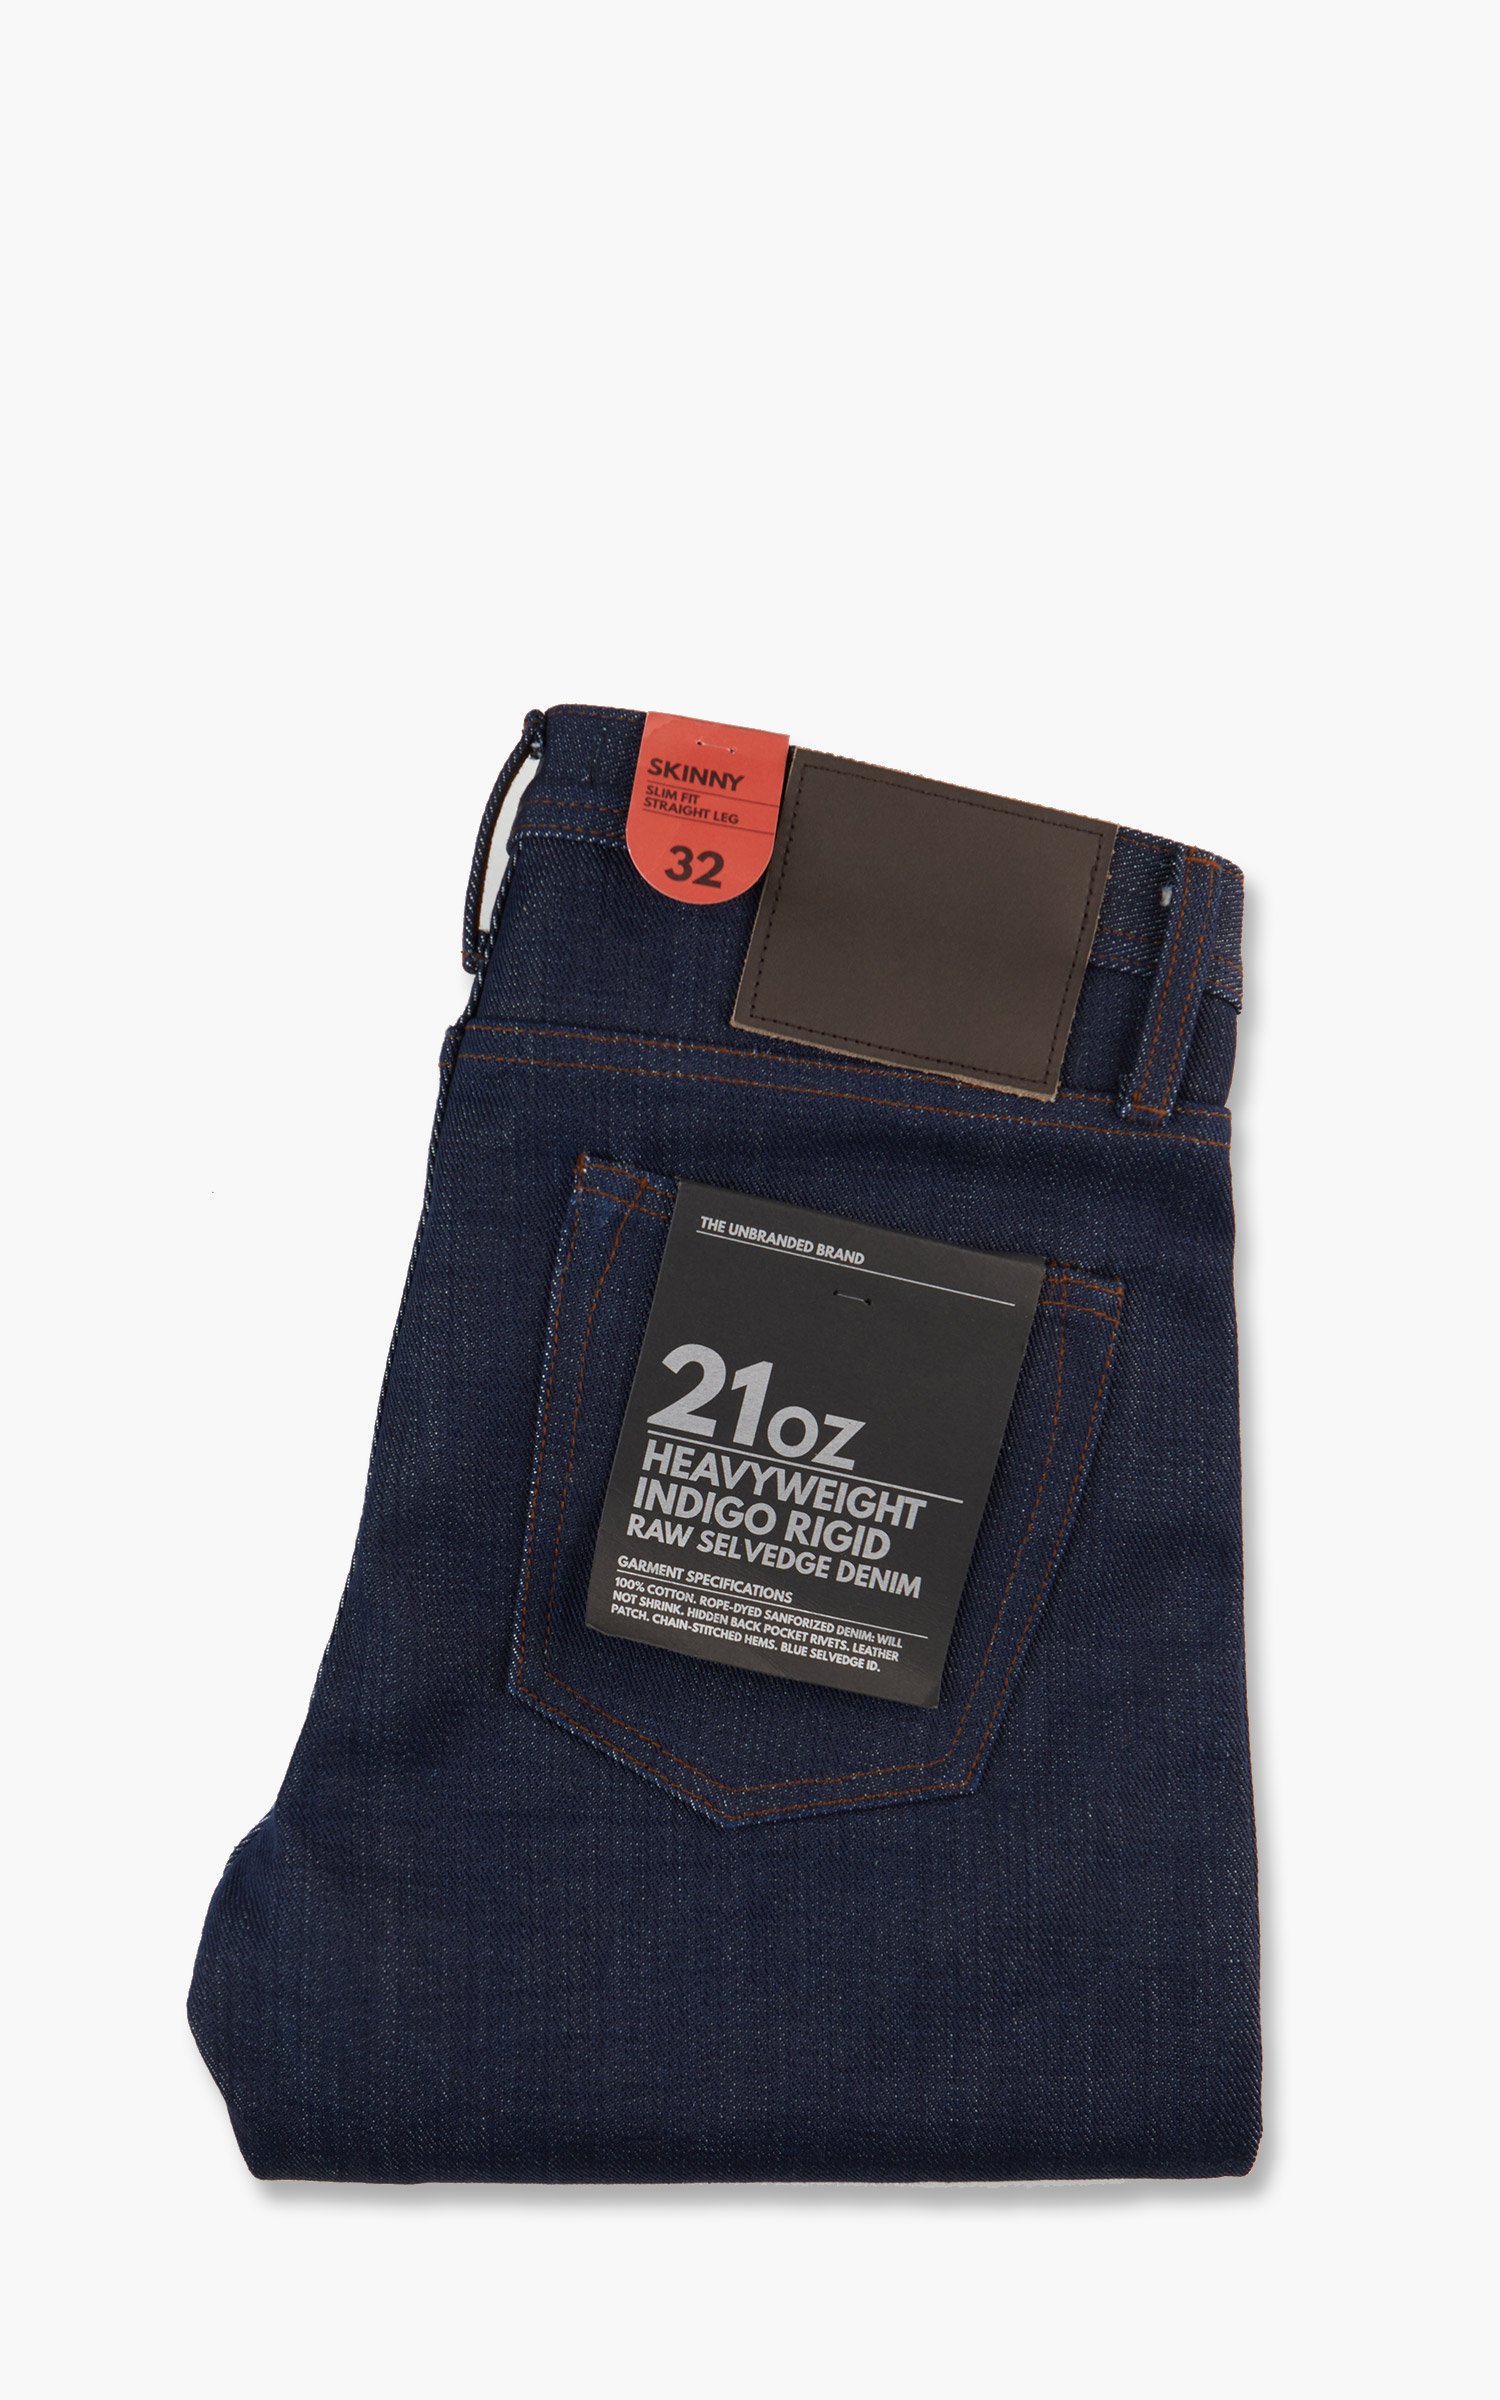 The Unbranded Brand - The limited edition The Unbranded Brand Heavyweight  21oz Indigo x Black is launching on Friday, July 15 at 12:00AM EST. The  21oz Indigo x Black will be available